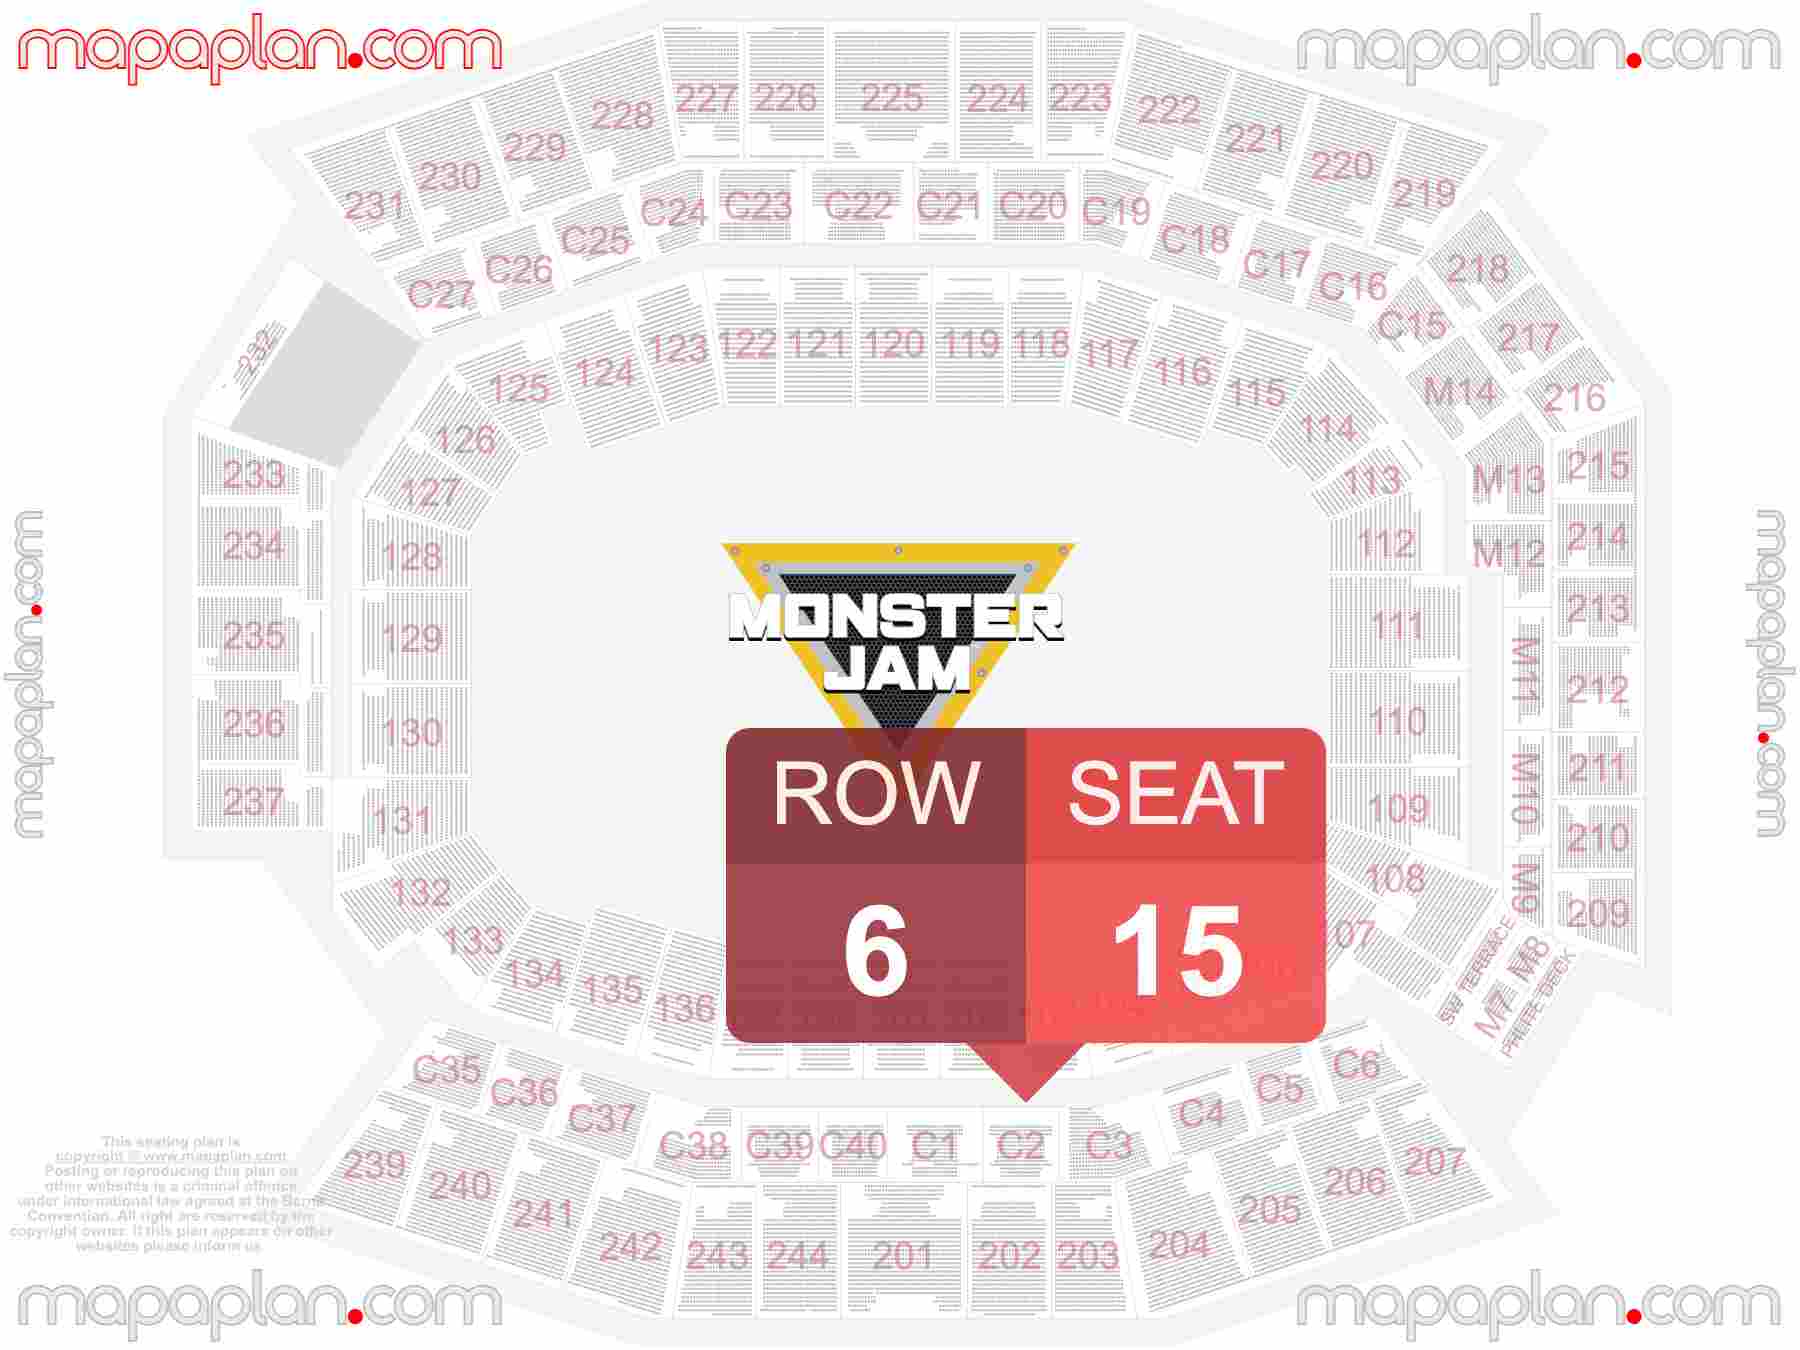 Philadelphia Lincoln Financial Field seating chart Monster Jam trucks detailed seating chart - 3d virtual seat numbers and row layout